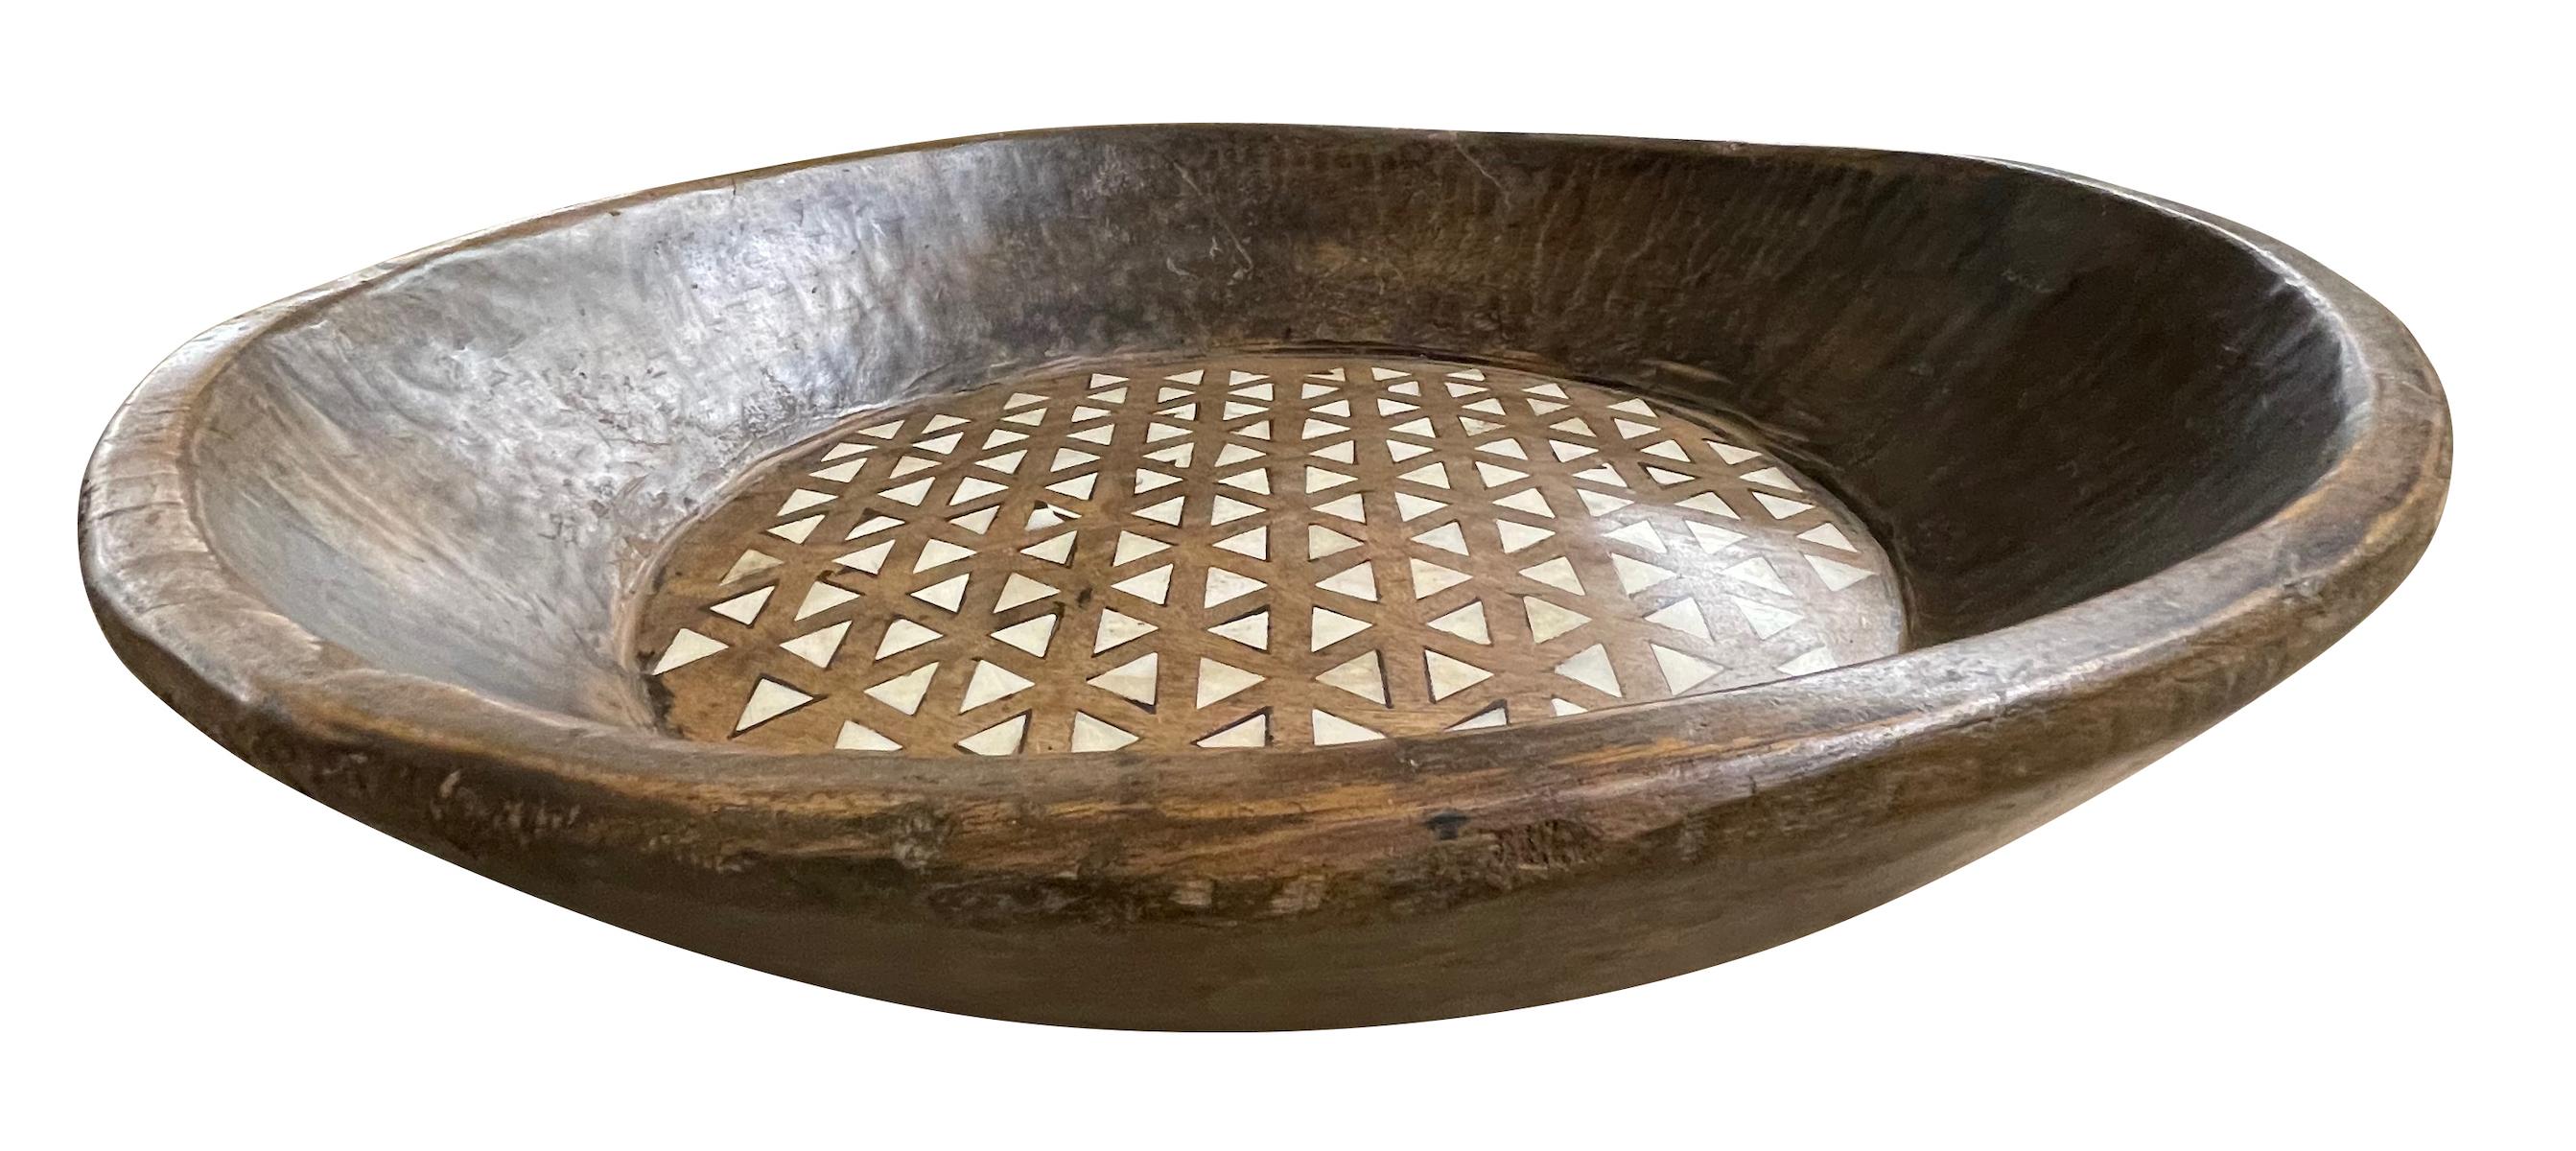 Contemporary Indian round wood bowl with triangular shaped bone inlay.
ARRIVING APRIL